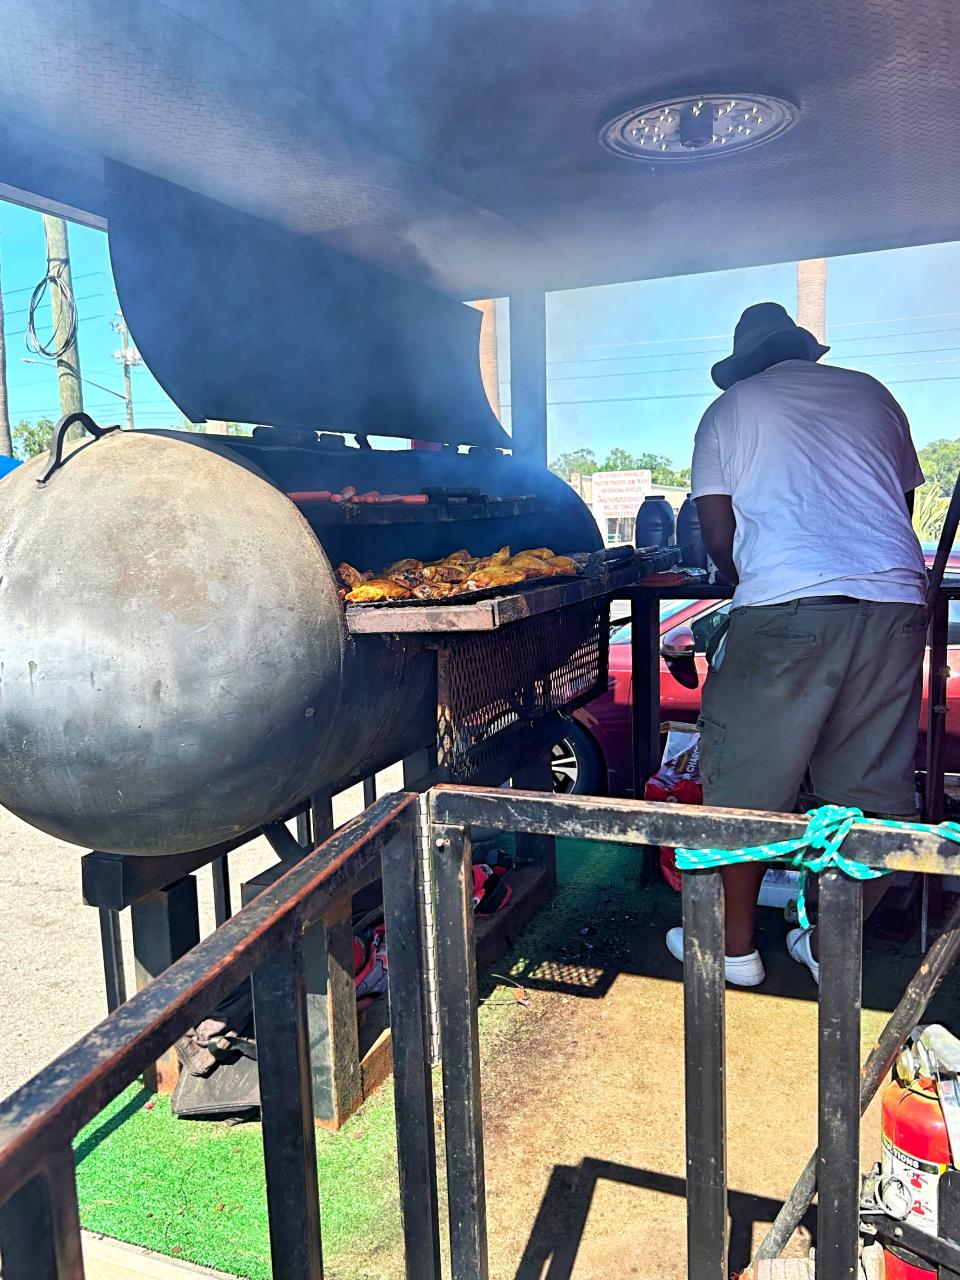 Southside Tallahassee residents being served hotdogs, hamburgers and more following Friday's storms on Saturday, May 11.